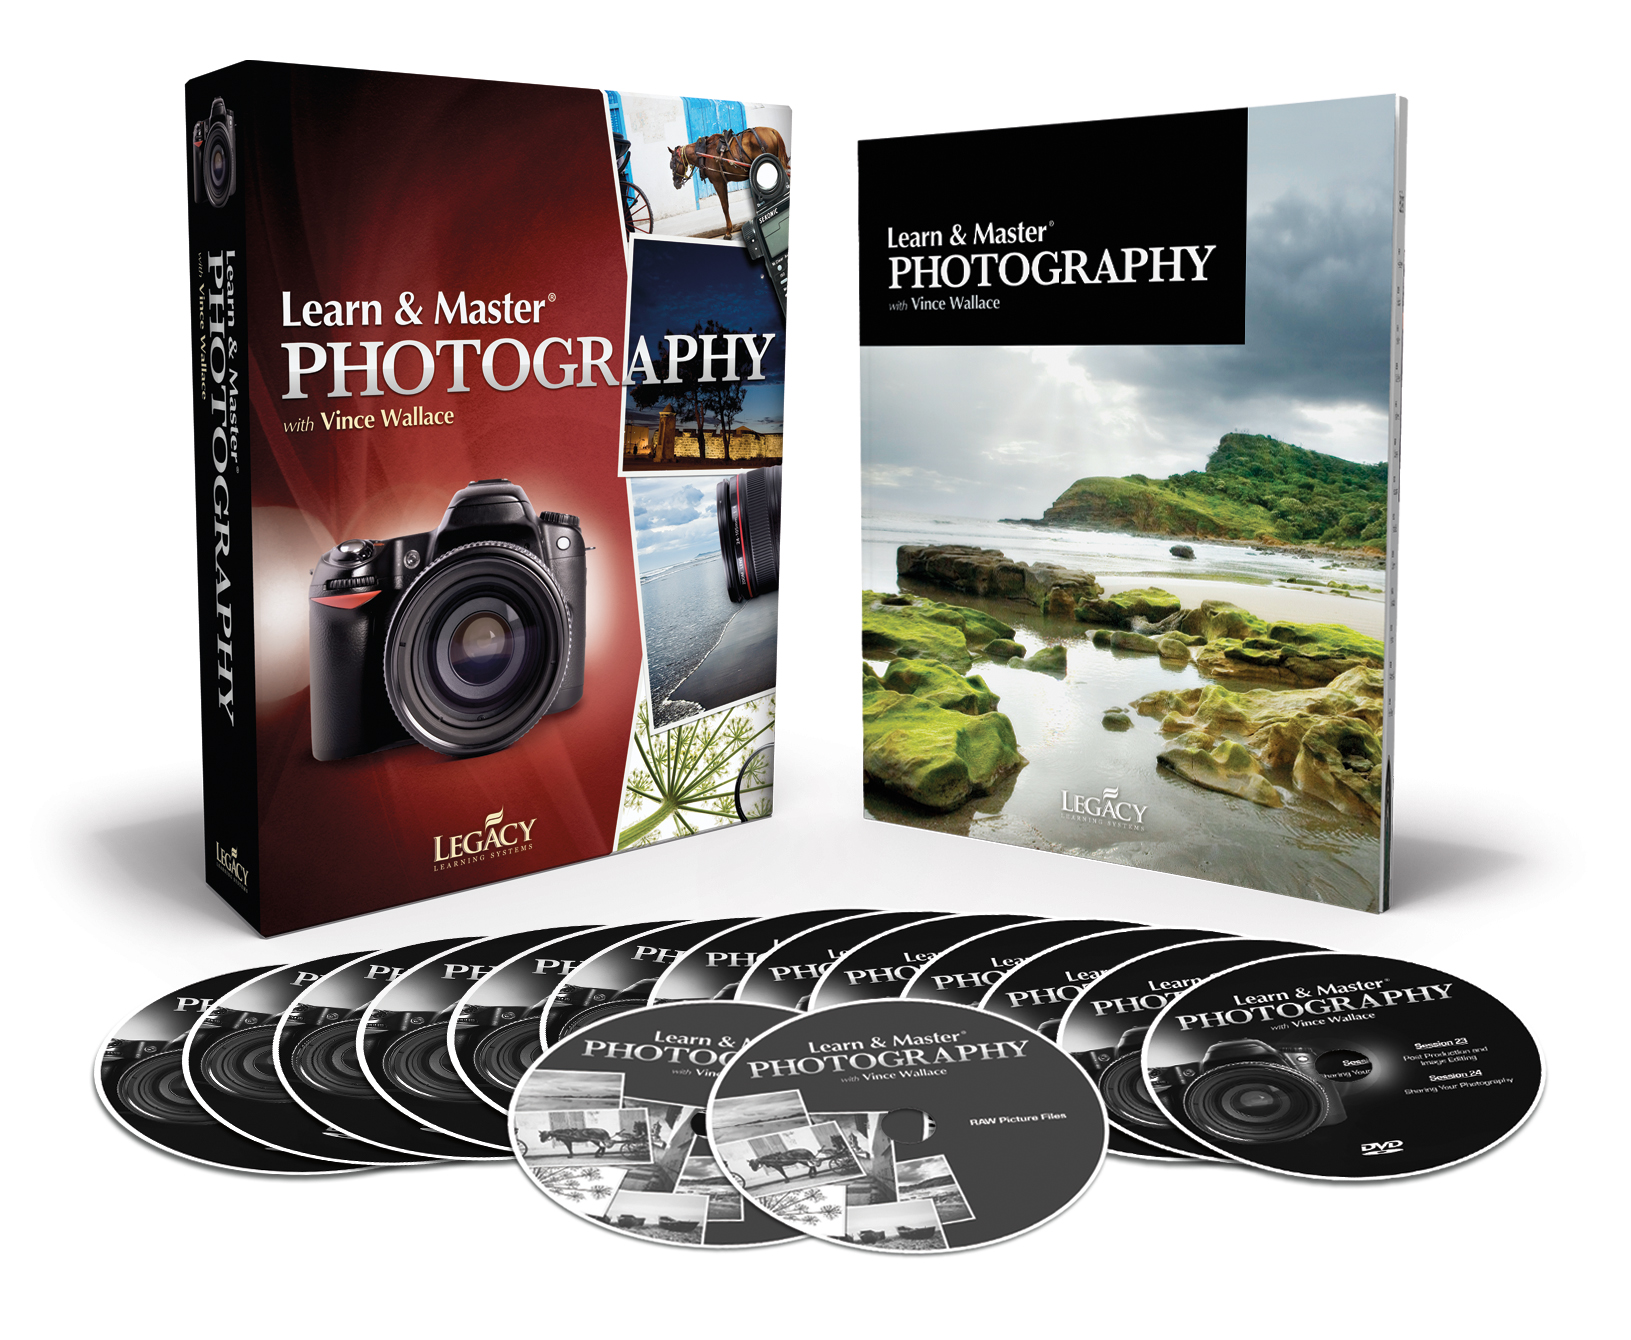 Learn & Master Photography Giveaway